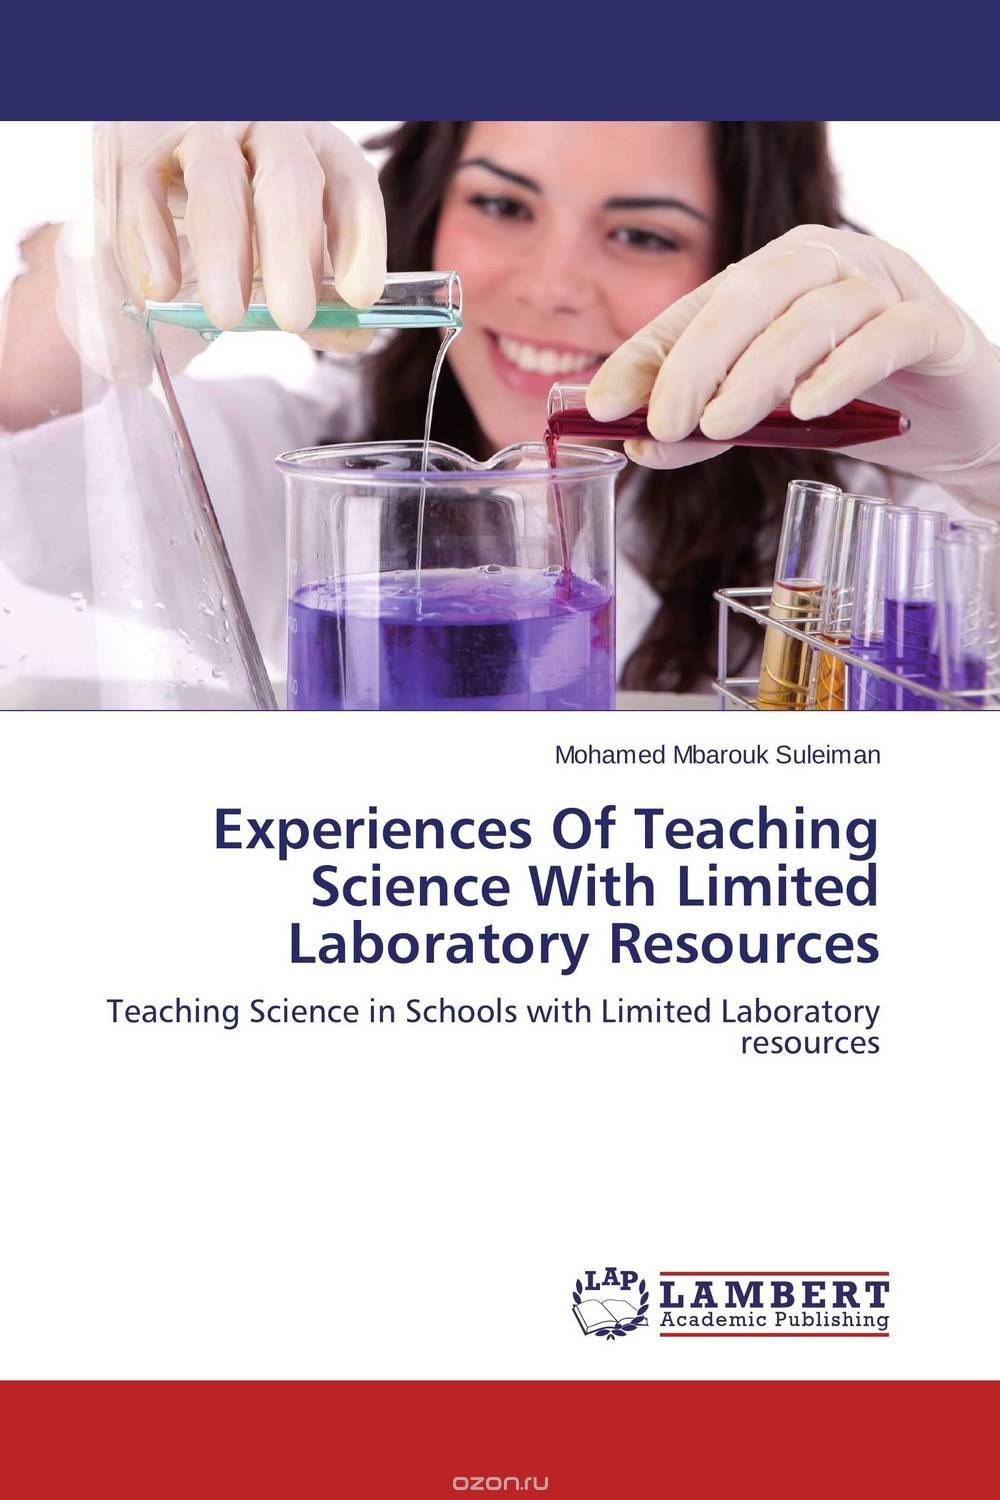 Скачать книгу "Experiences Of Teaching Science With Limited Laboratory Resources"